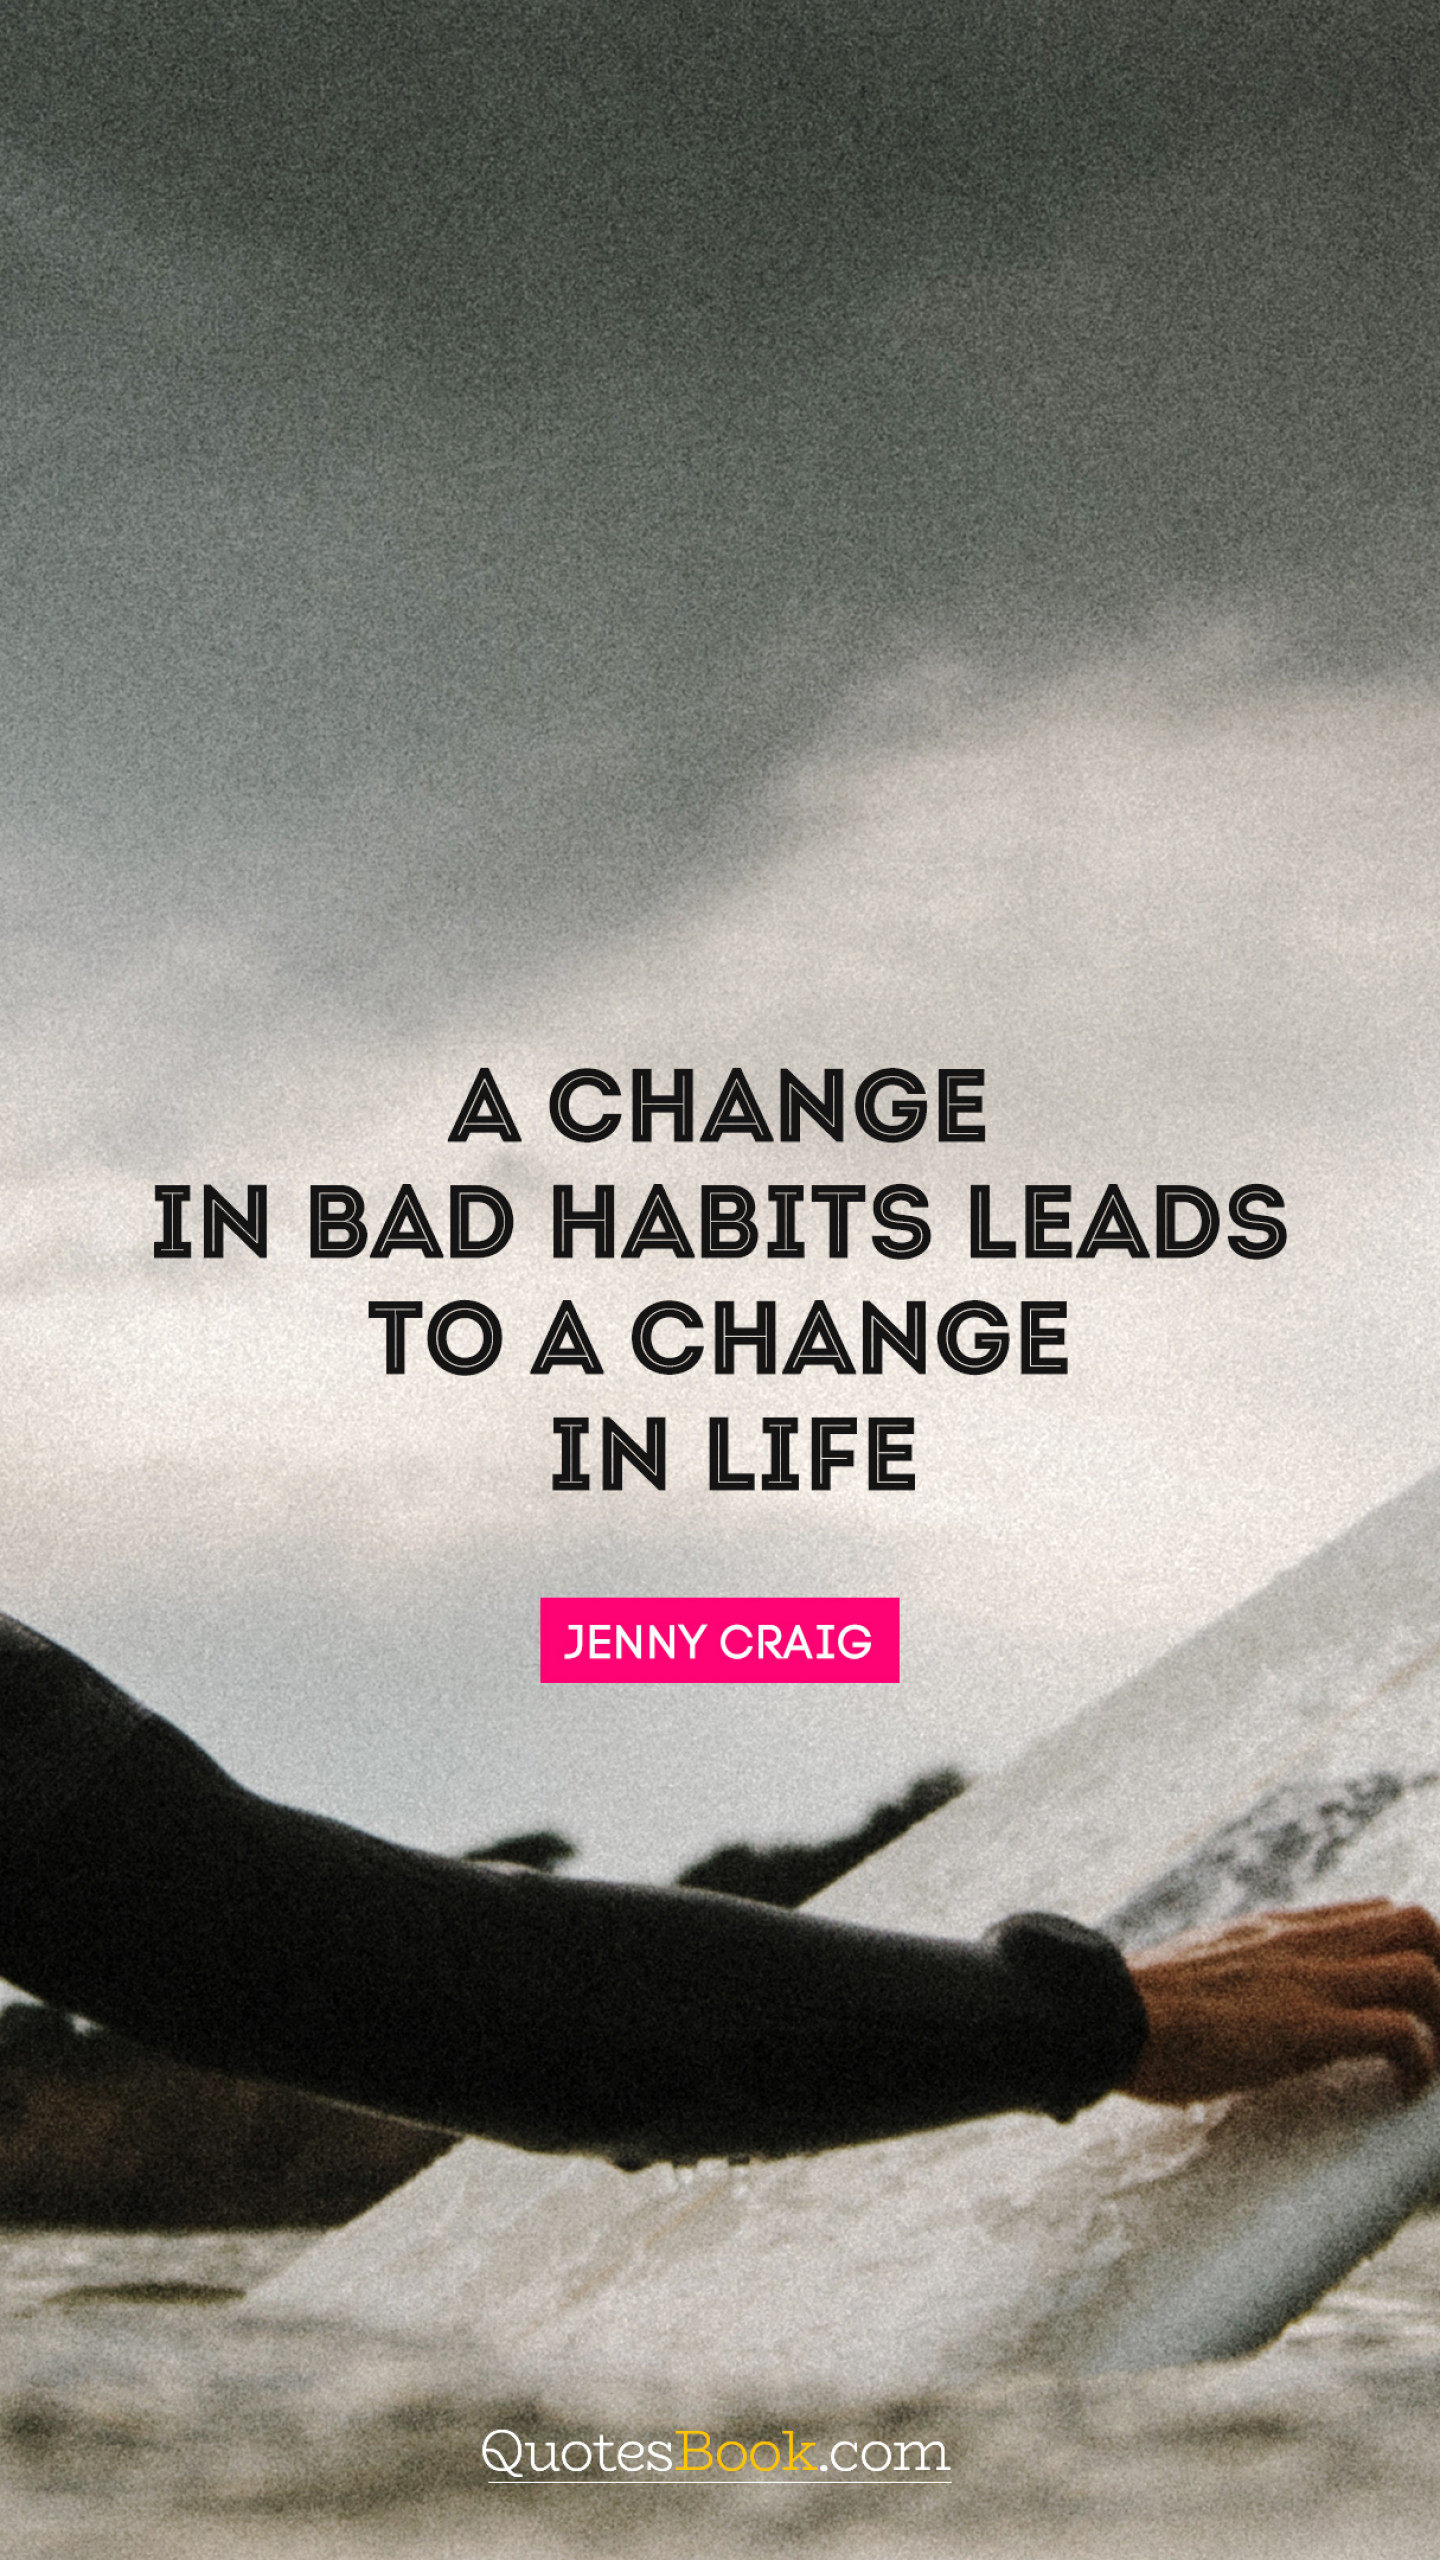 A change in bad habits leads to a change in life. - Quote by Jenny